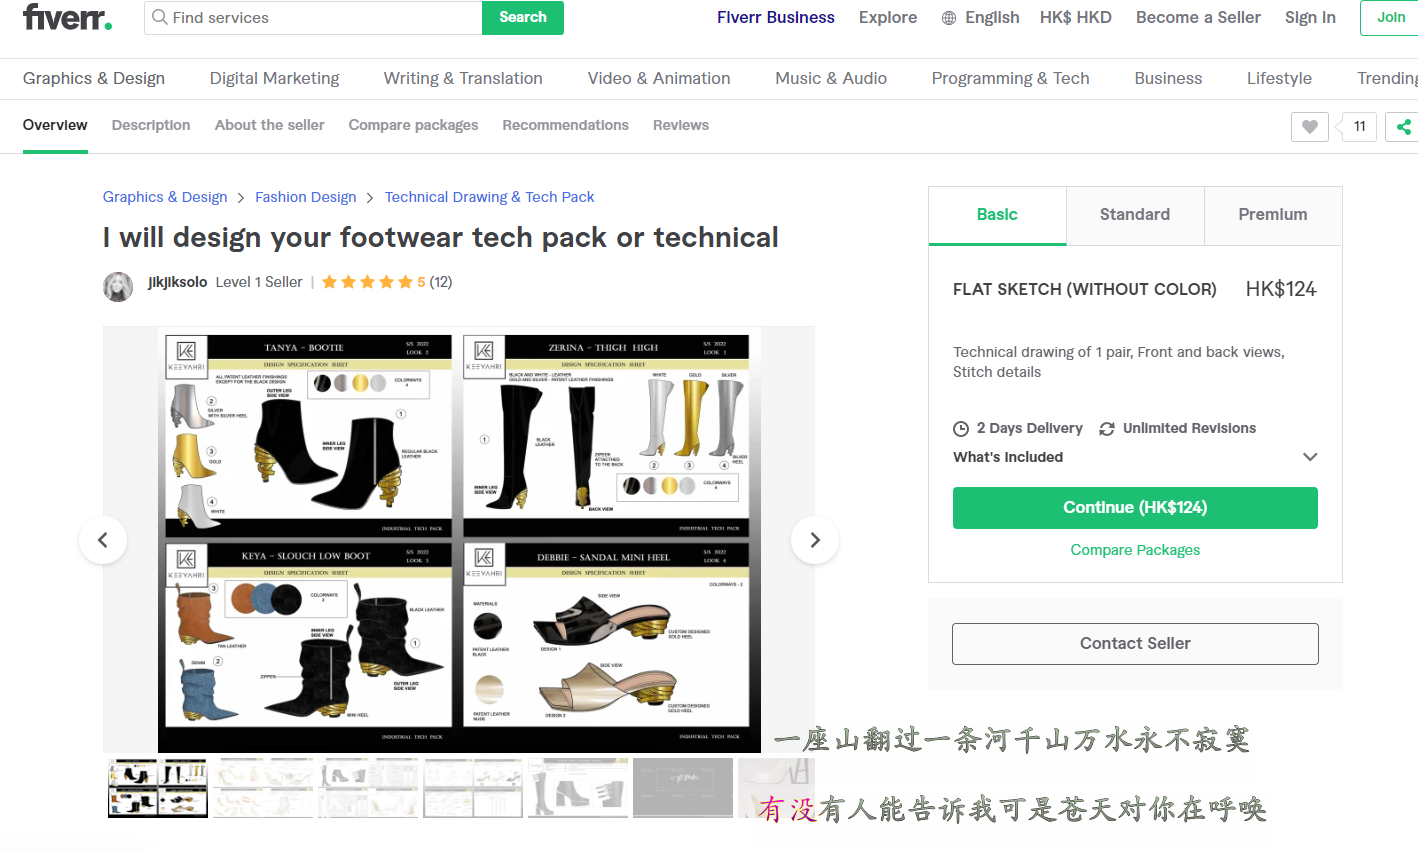 https://www.fiverr.com/jikhiksolo/design-your-footwear-tech-pack-or-technical?utm_campaign=ios_delivery&utm_medium=shared&utm_source=&utm_term=